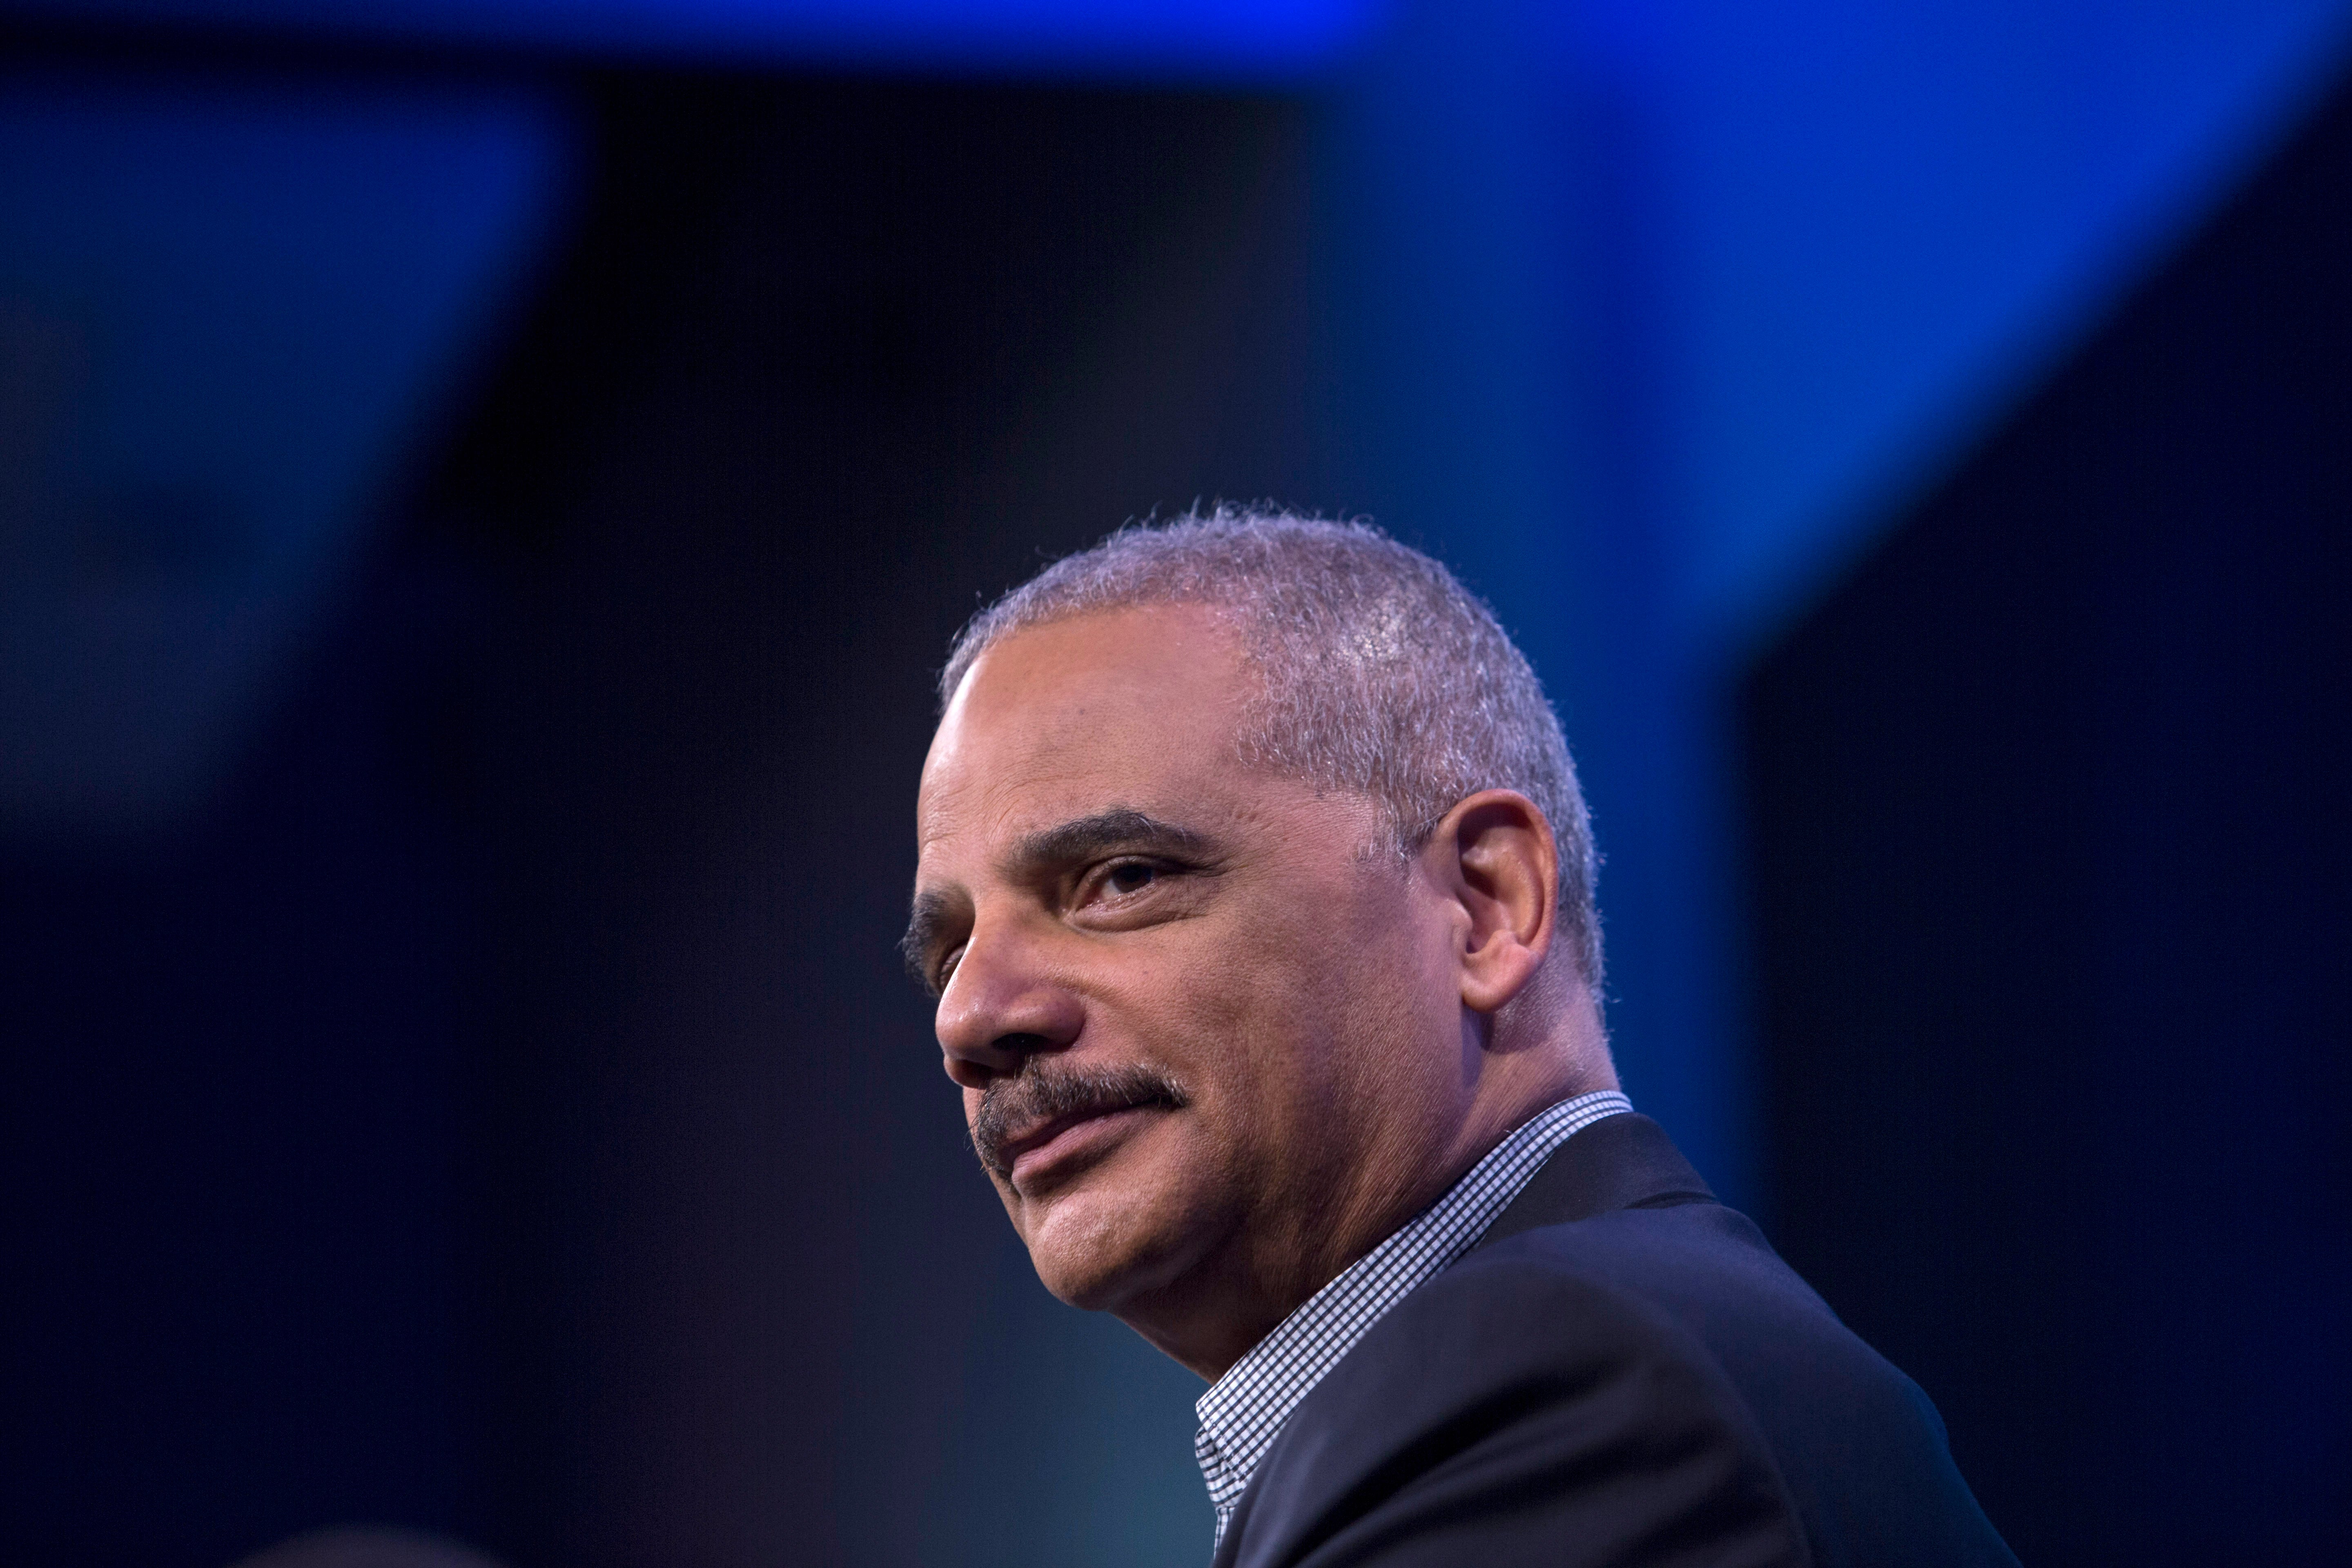 Eric Holder Revises Famous Michelle Obama Quote: 'When They Go Low, We Kick Them'